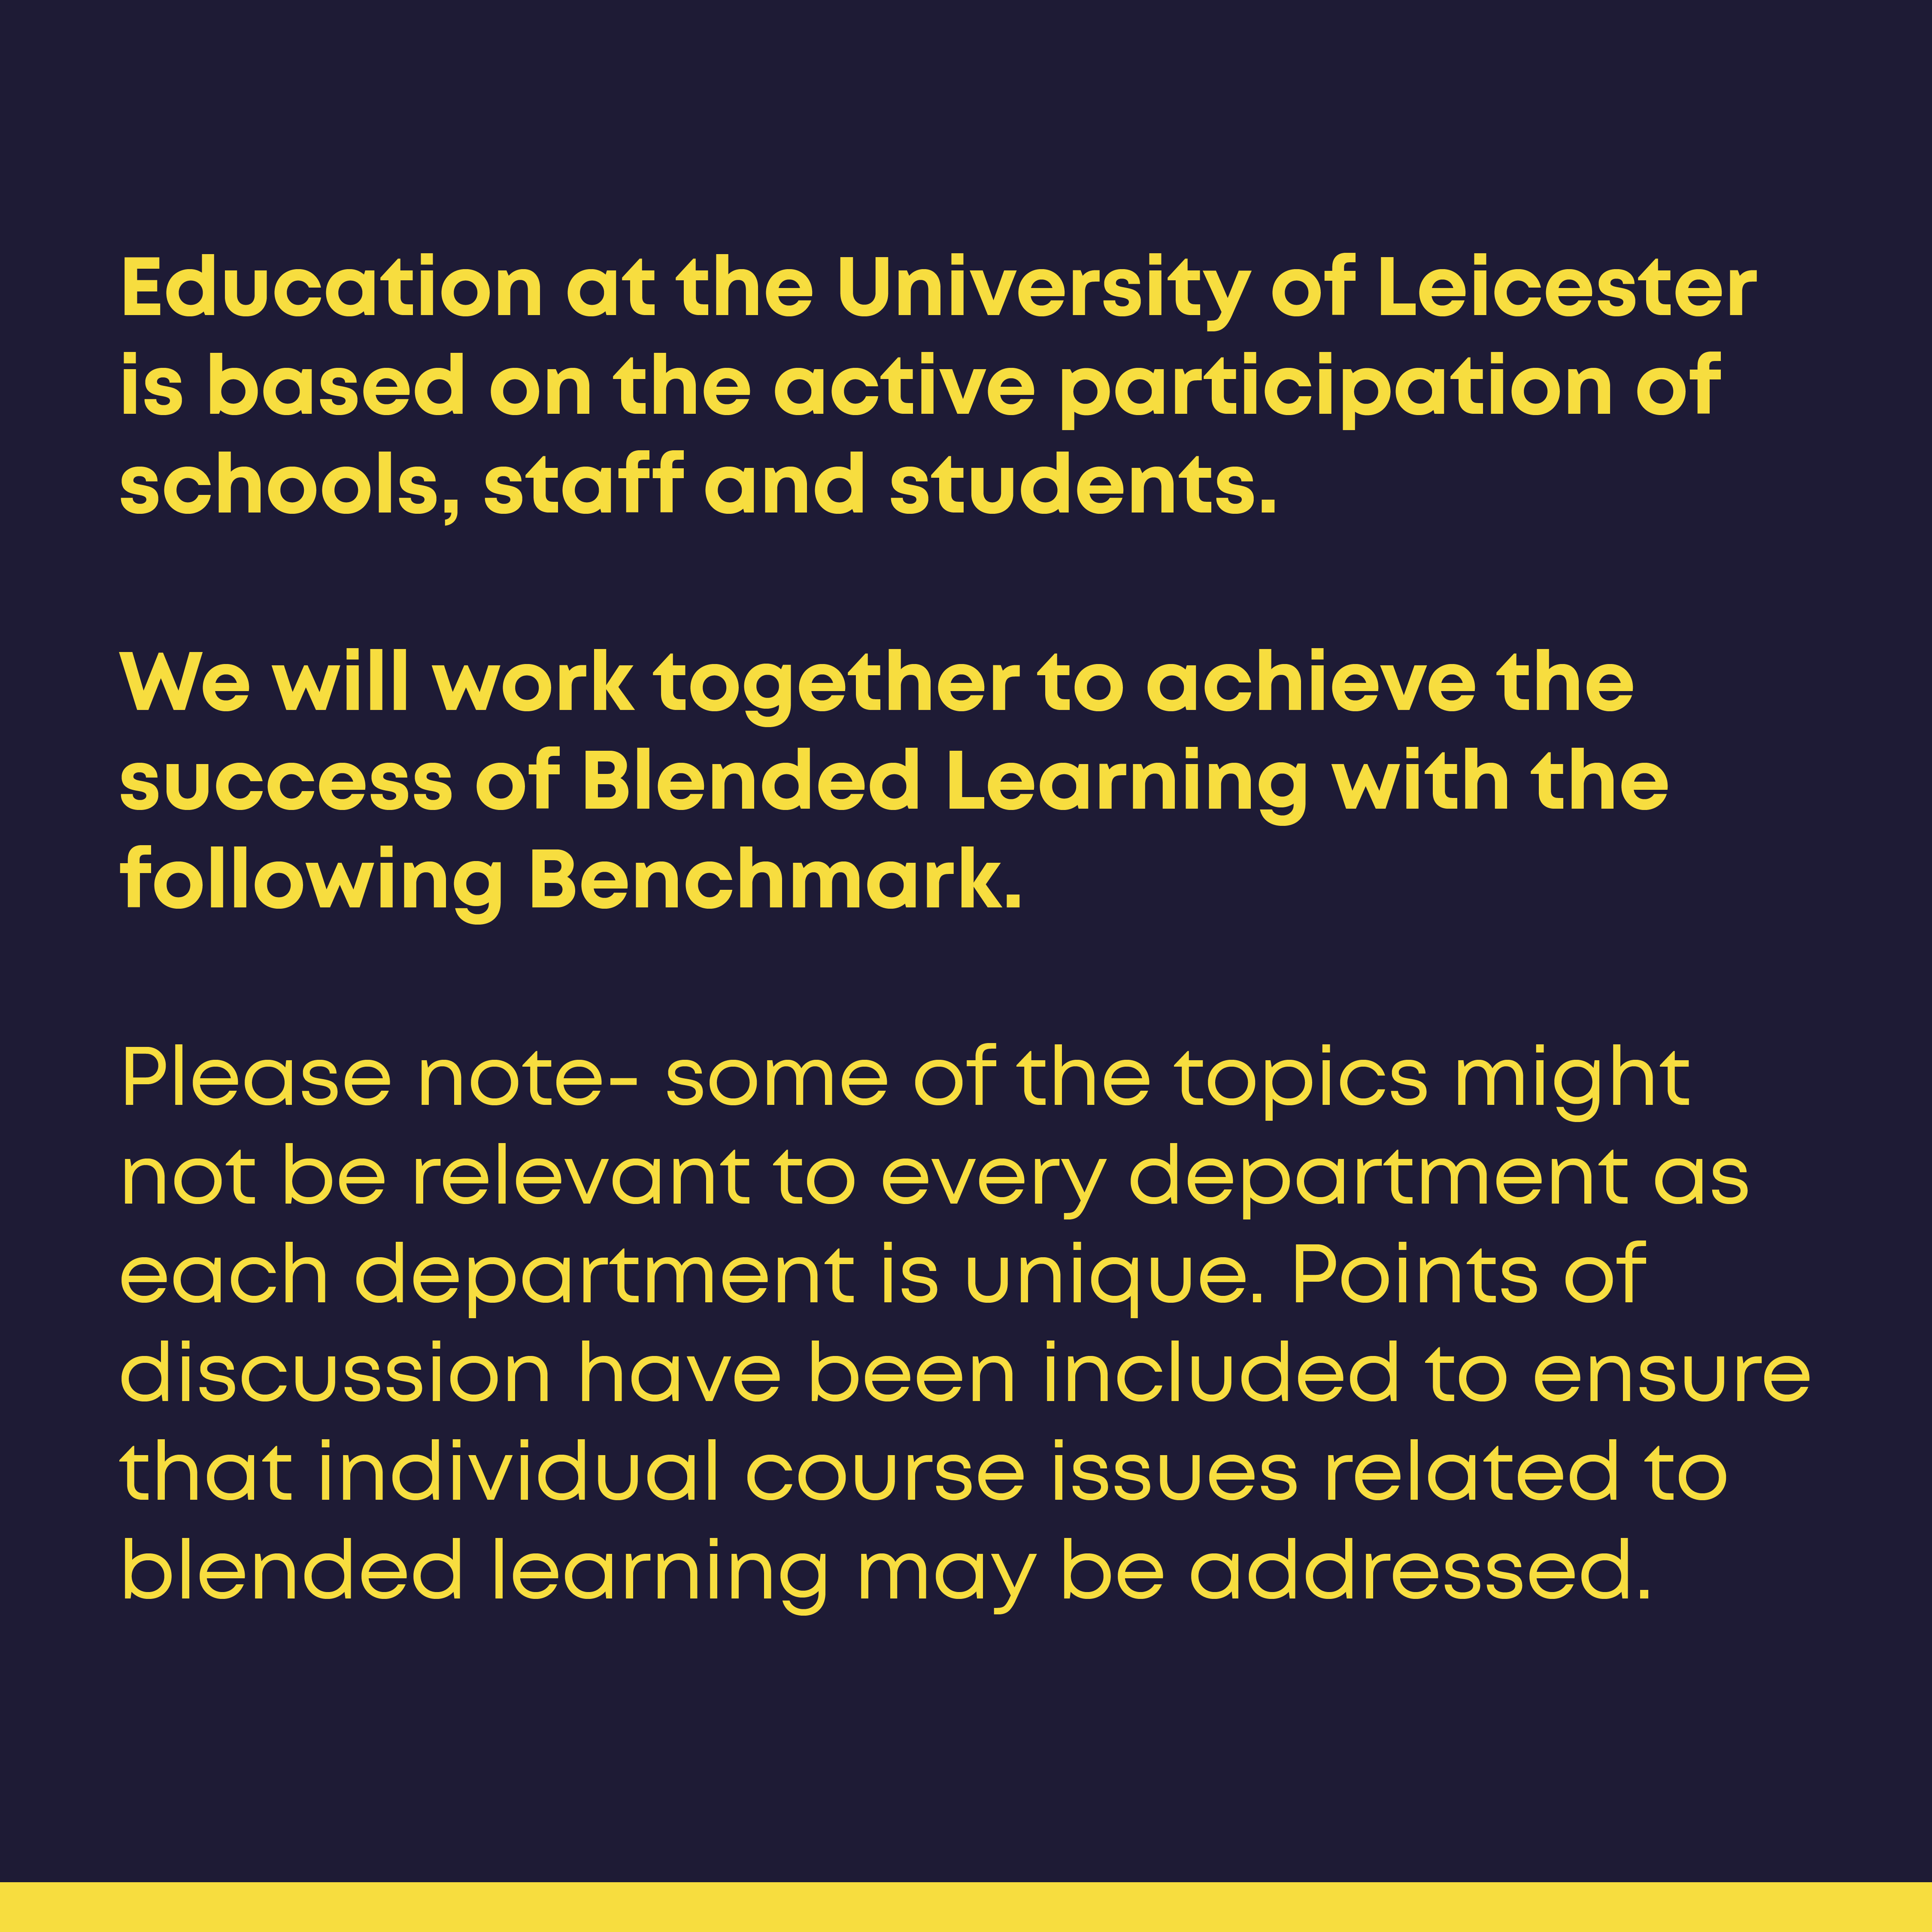 Education at the University of Leicester is based on the active participation of all parties. By following the Benchmark, we will work together to achieve successful Blended Learning.  Please note- some of the points in the Benchmark might not be relevant to every department as each department is unique. Points of discussion have been included to ensure that individual course issues related to blended learning may be addressed.